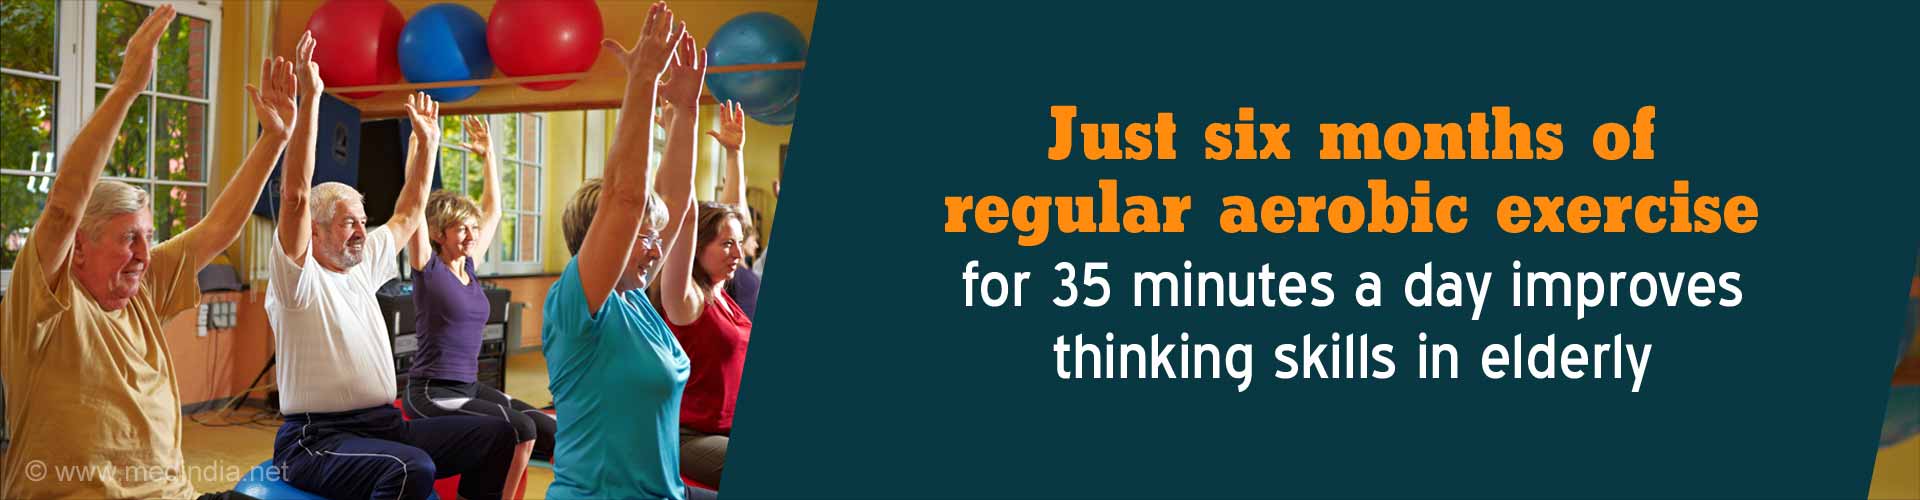 Just six months of regular aerobic exercise for 35 minutes a day improves thinking skills in elderly.
